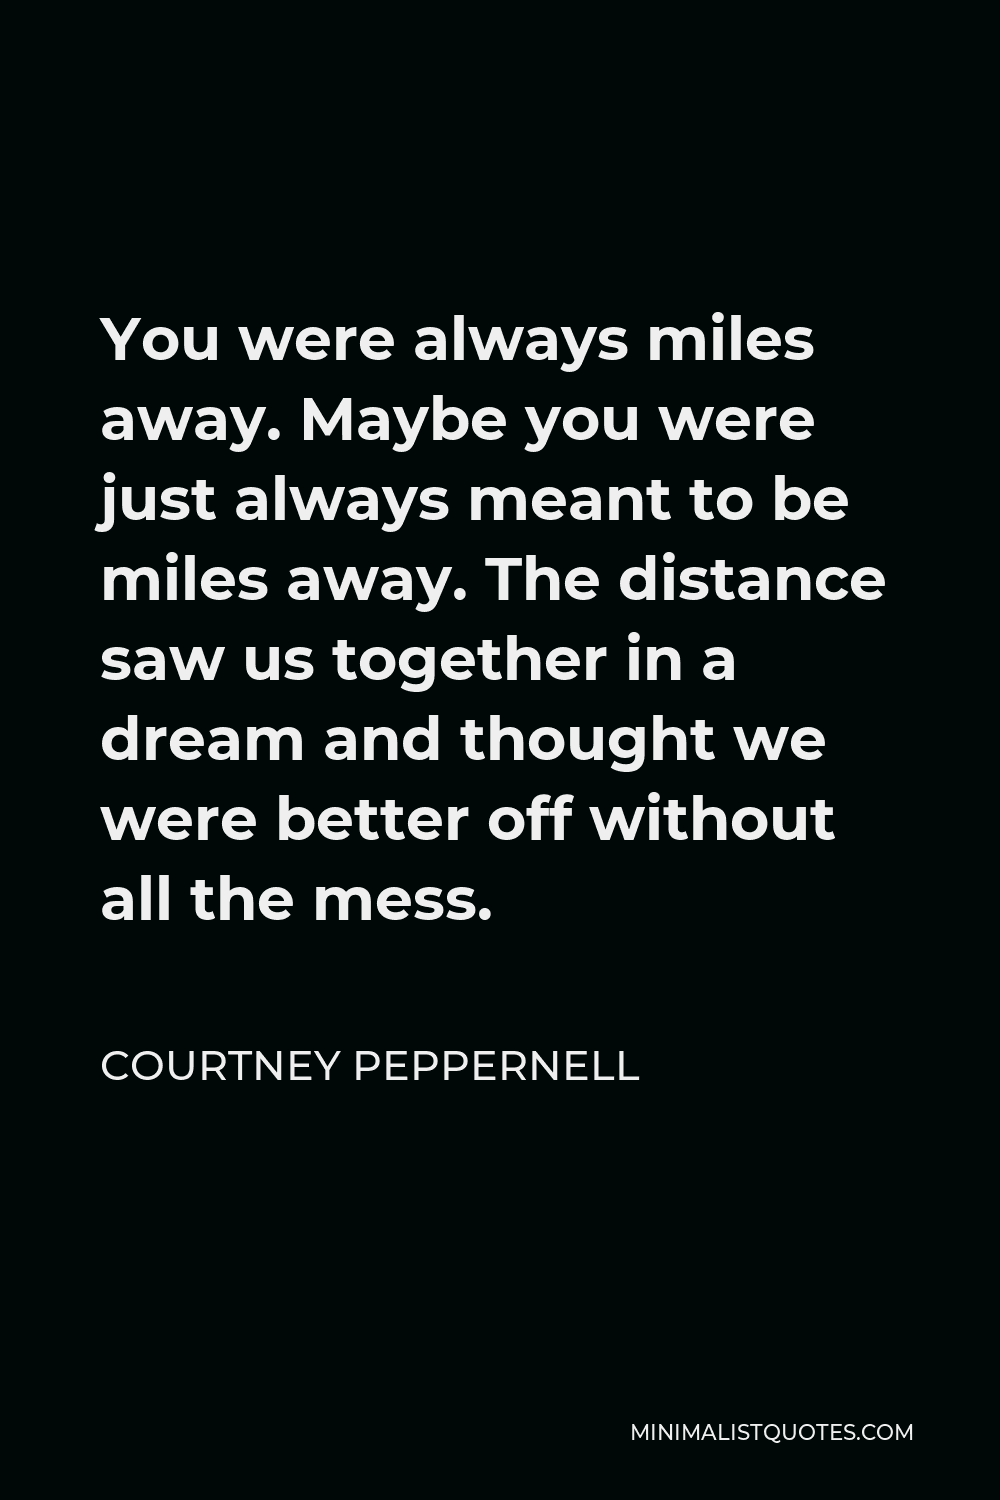 Courtney Peppernell Quote - You were always miles away. Maybe you were just always meant to be miles away. The distance saw us together in a dream and thought we were better off without all the mess.